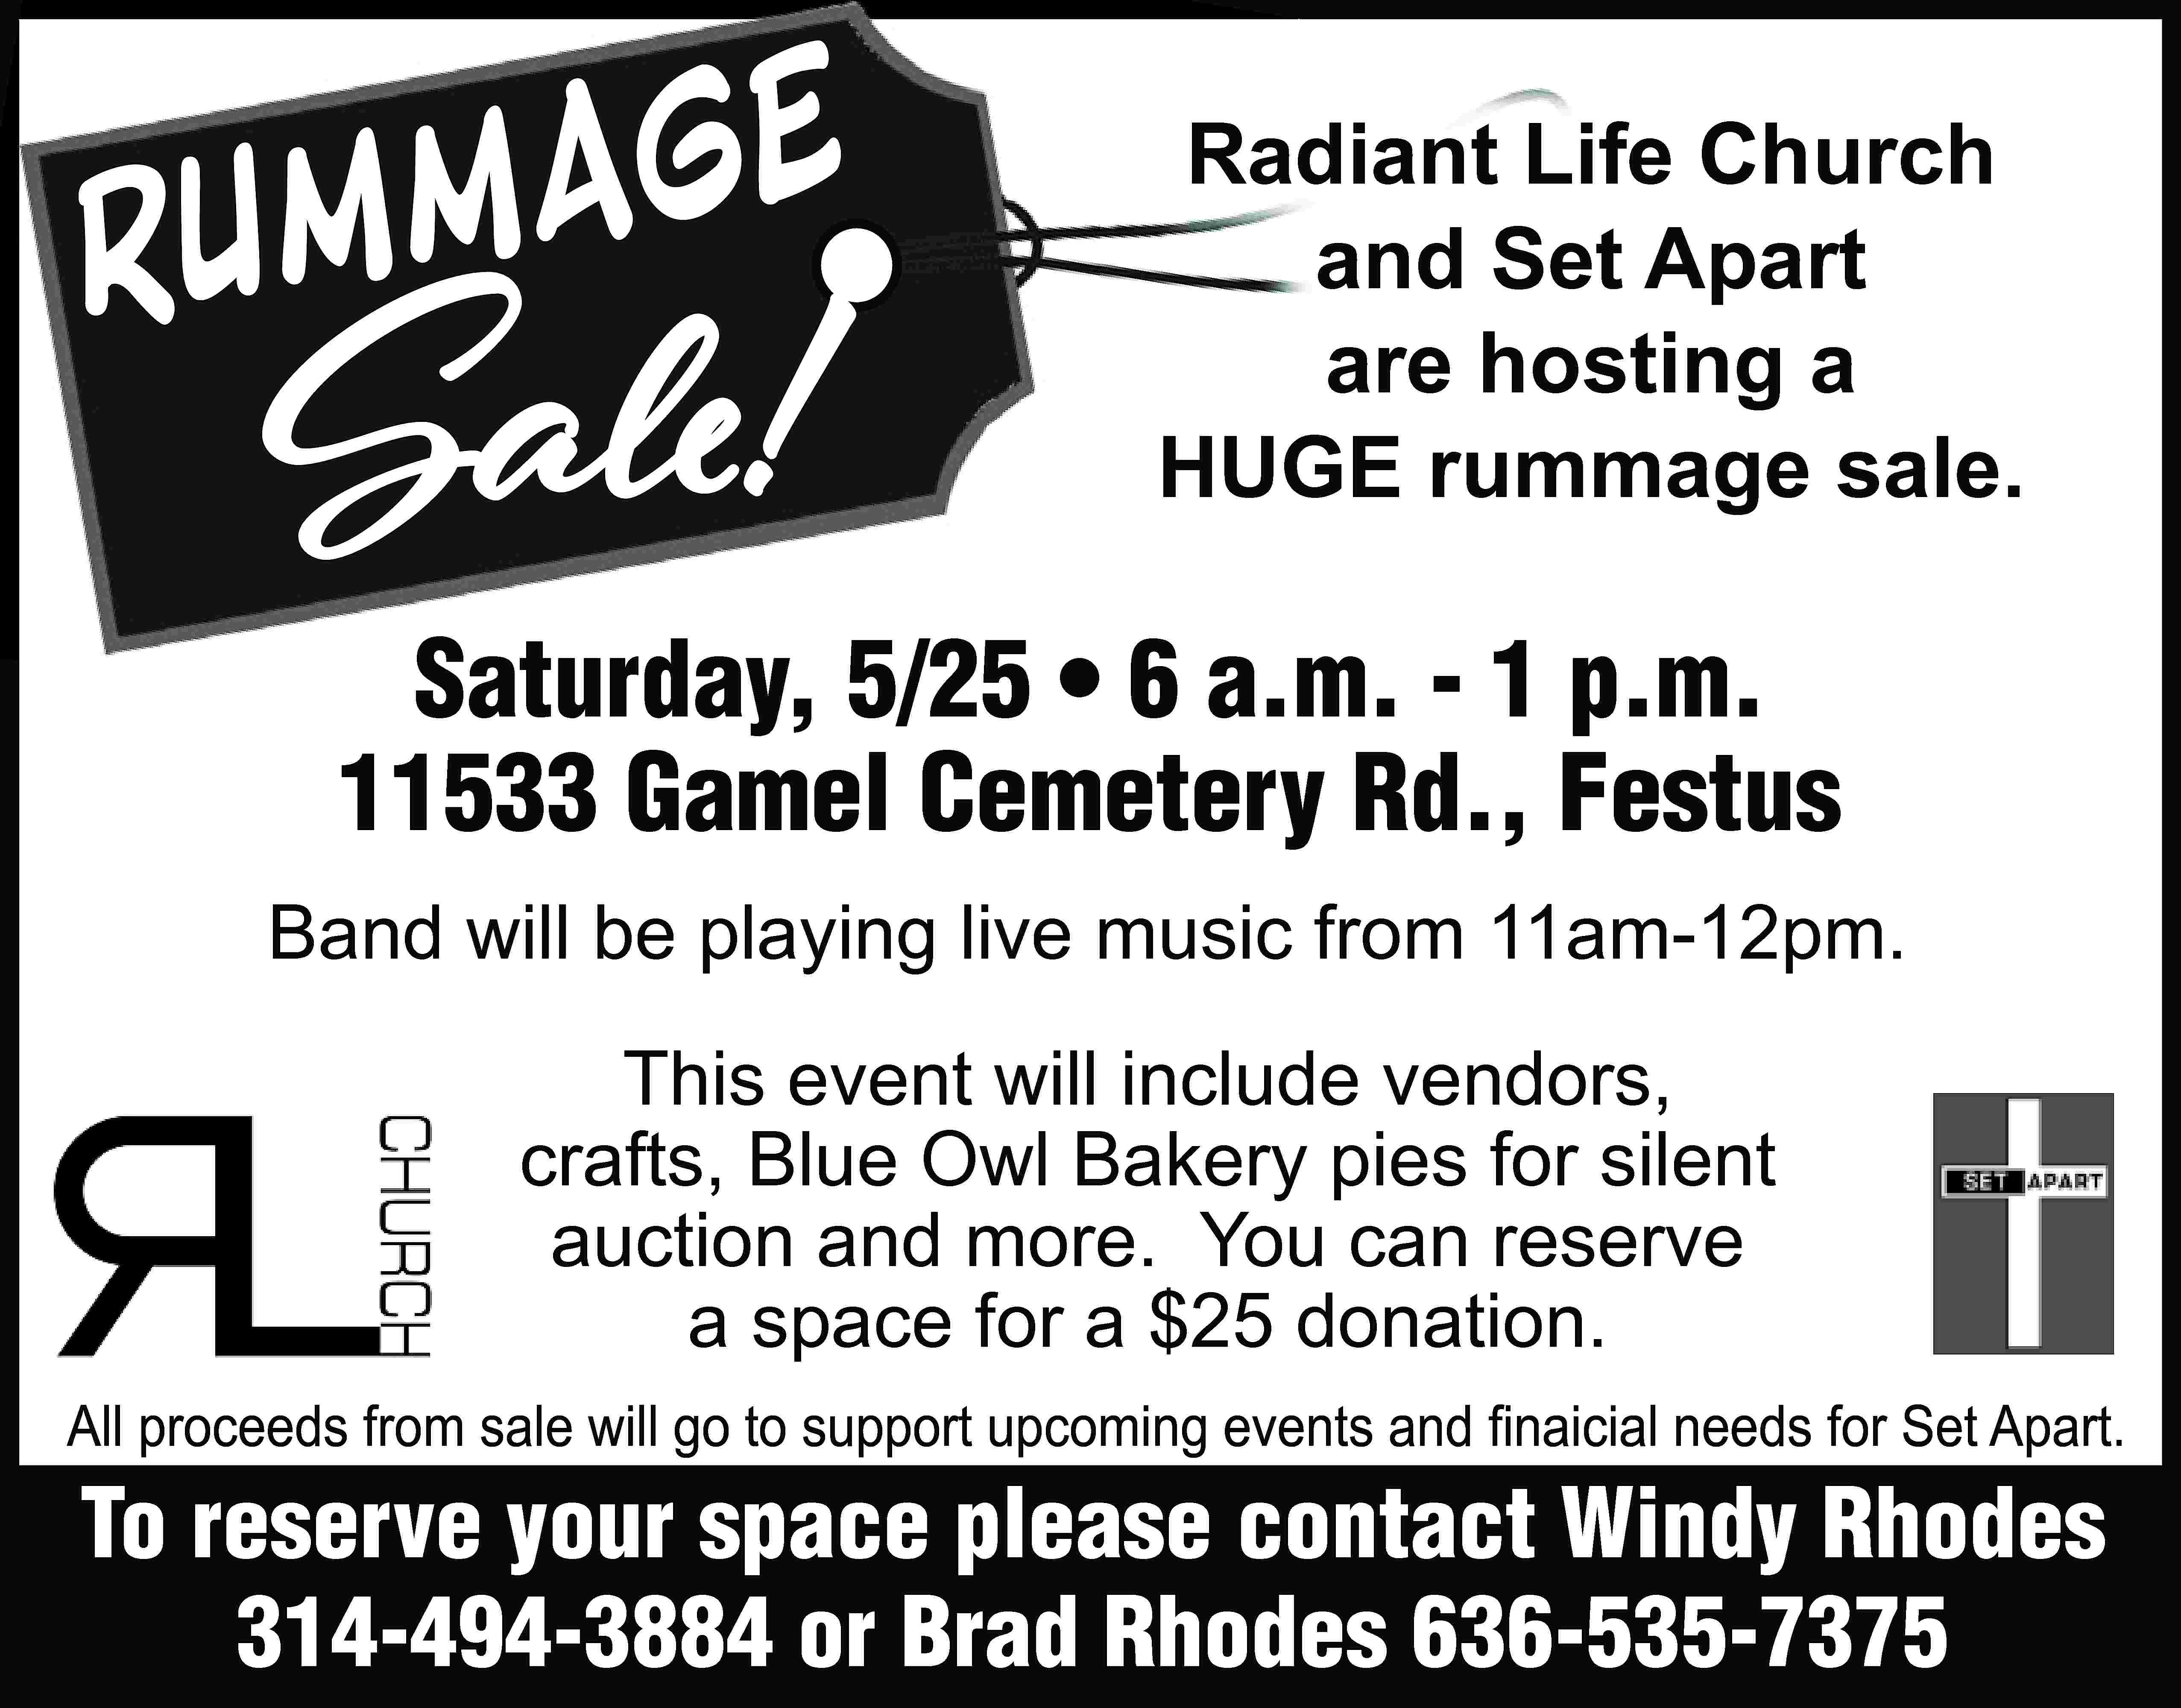 ge Rumma Sale! Radiant Life  ge Rumma Sale! Radiant Life Church and Set Apart are hosting a HUGE rummage sale. Saturday, 5/25 • 6 a.m. - 1 p.m. 11533 Gamel Cemetery Rd., Festus Band will be playing live music from 11am-12pm. This event will include vendors, crafts, Blue Owl Bakery pies for silent auction and more. You can reserve a space for a $25 donation. All proceeds from sale will go to support upcoming events and ﬁnaicial needs for Set Apart. To reserve your space please contact Windy Rhodes 314-494-3884 or Brad Rhodes 636-535-7375